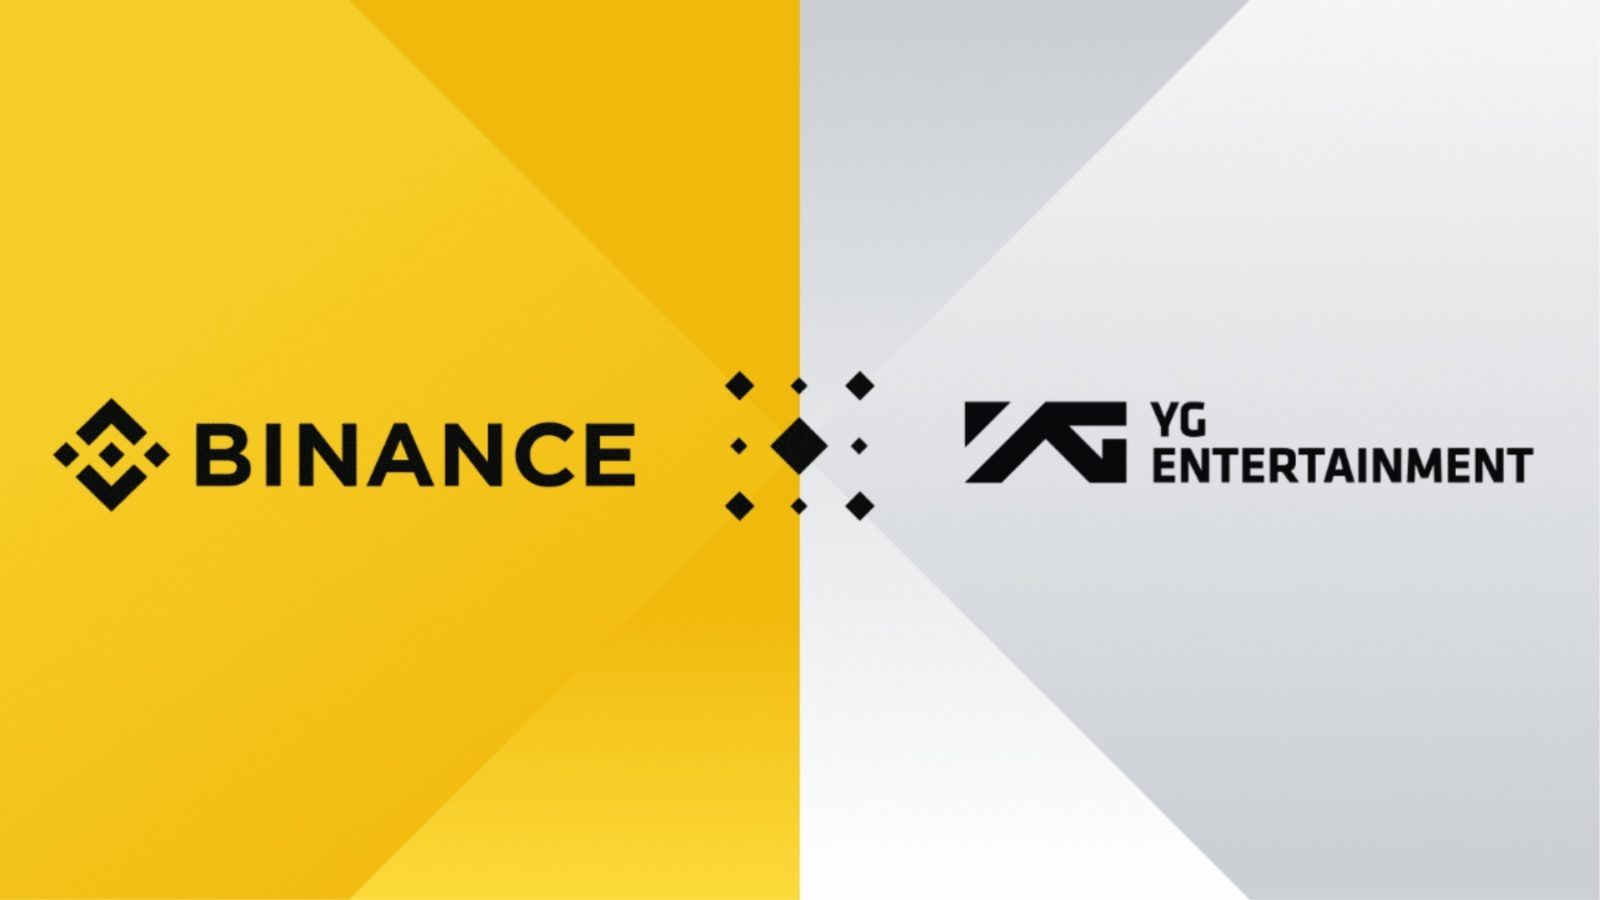 Binance teams up with K-pop agency YG Entertainment to create NFTs and games